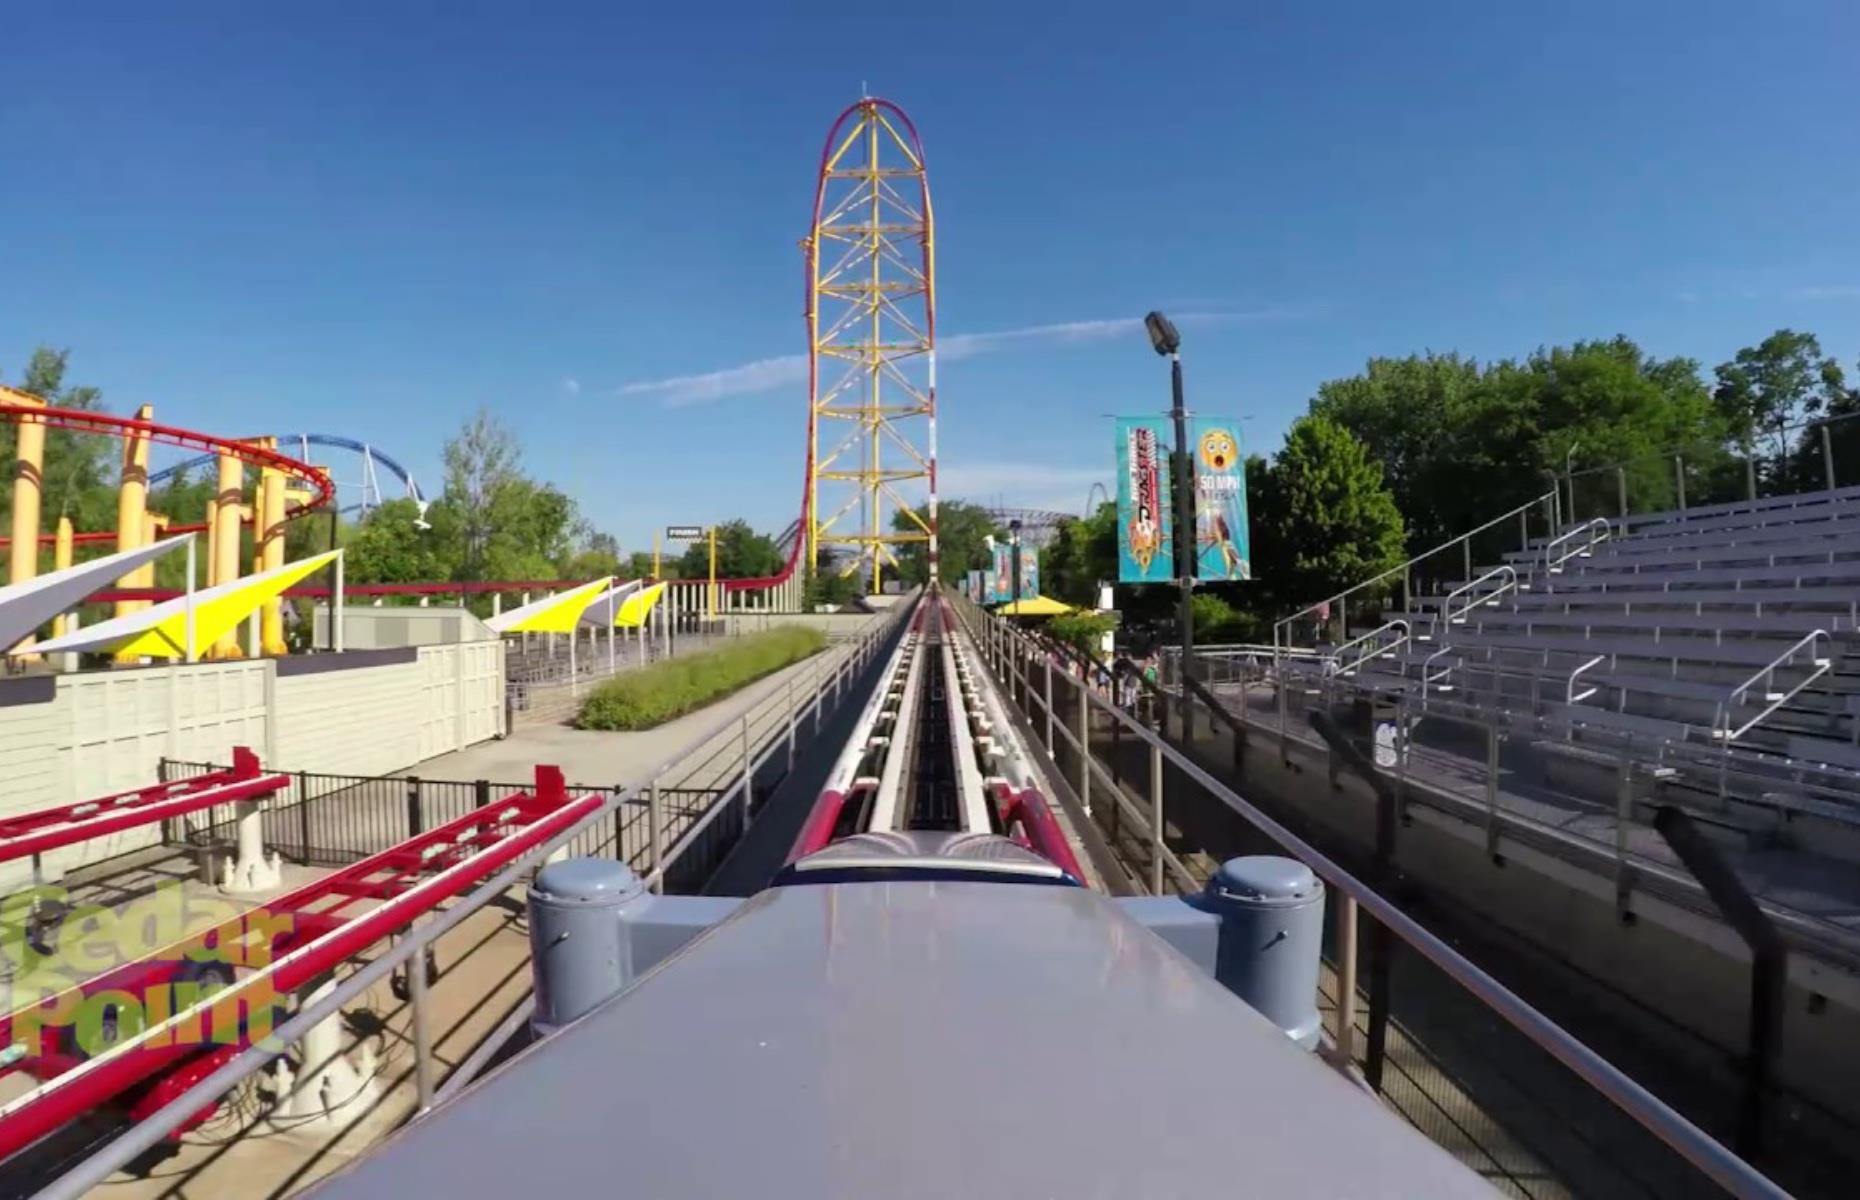 <p>Cedar Point's Top Thrill Dragster was the first strata coaster in the world when it opened in 2003. This specific type of ride uses a powerful launching system to propel the roller coaster upwards of 400 feet at a 90° angle and back down at the same angle.</p>  <p>The Top Thrill Dragster rockets riders to 120 miles per hour in 3.8 seconds. It’s become an iconic ride among roller coaster enthusiasts.</p>